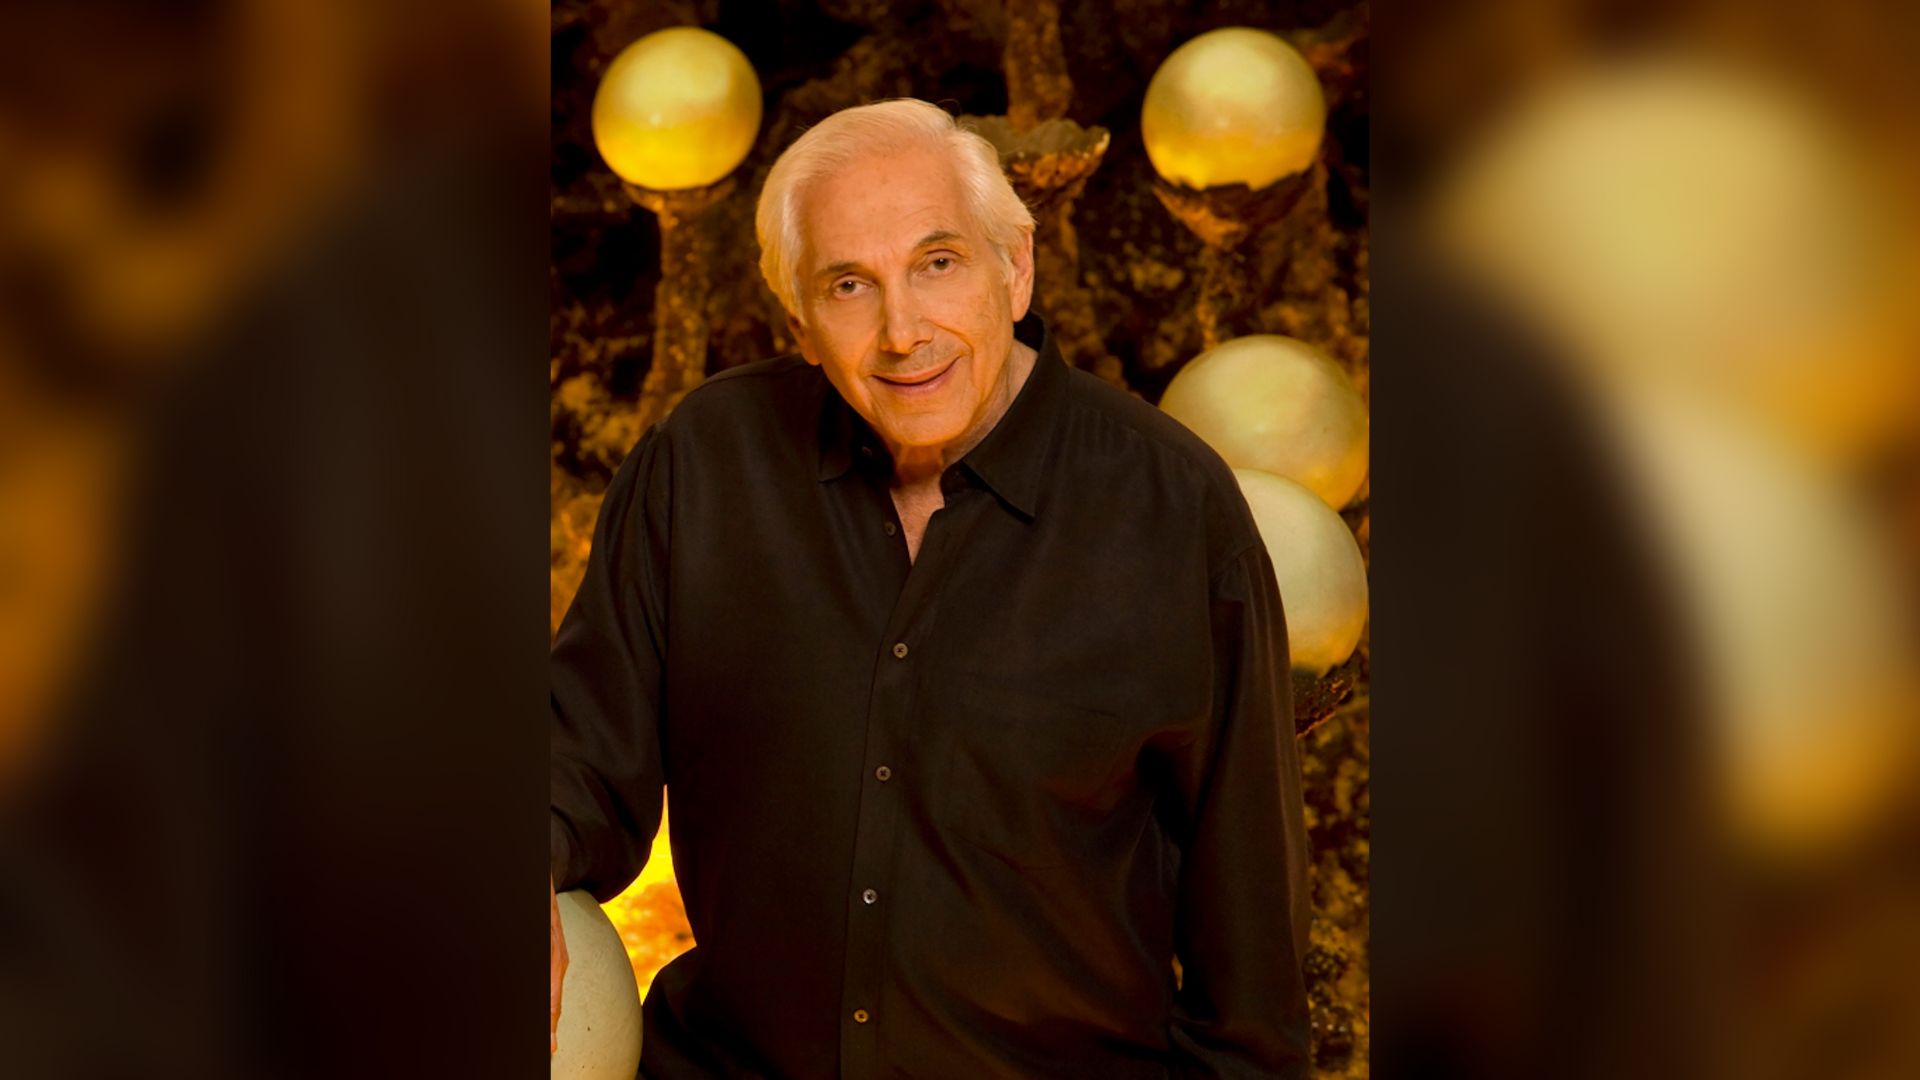 Marty Krofft, a legendary figure often referred to as the “King of Saturday Mornings," died Satur...